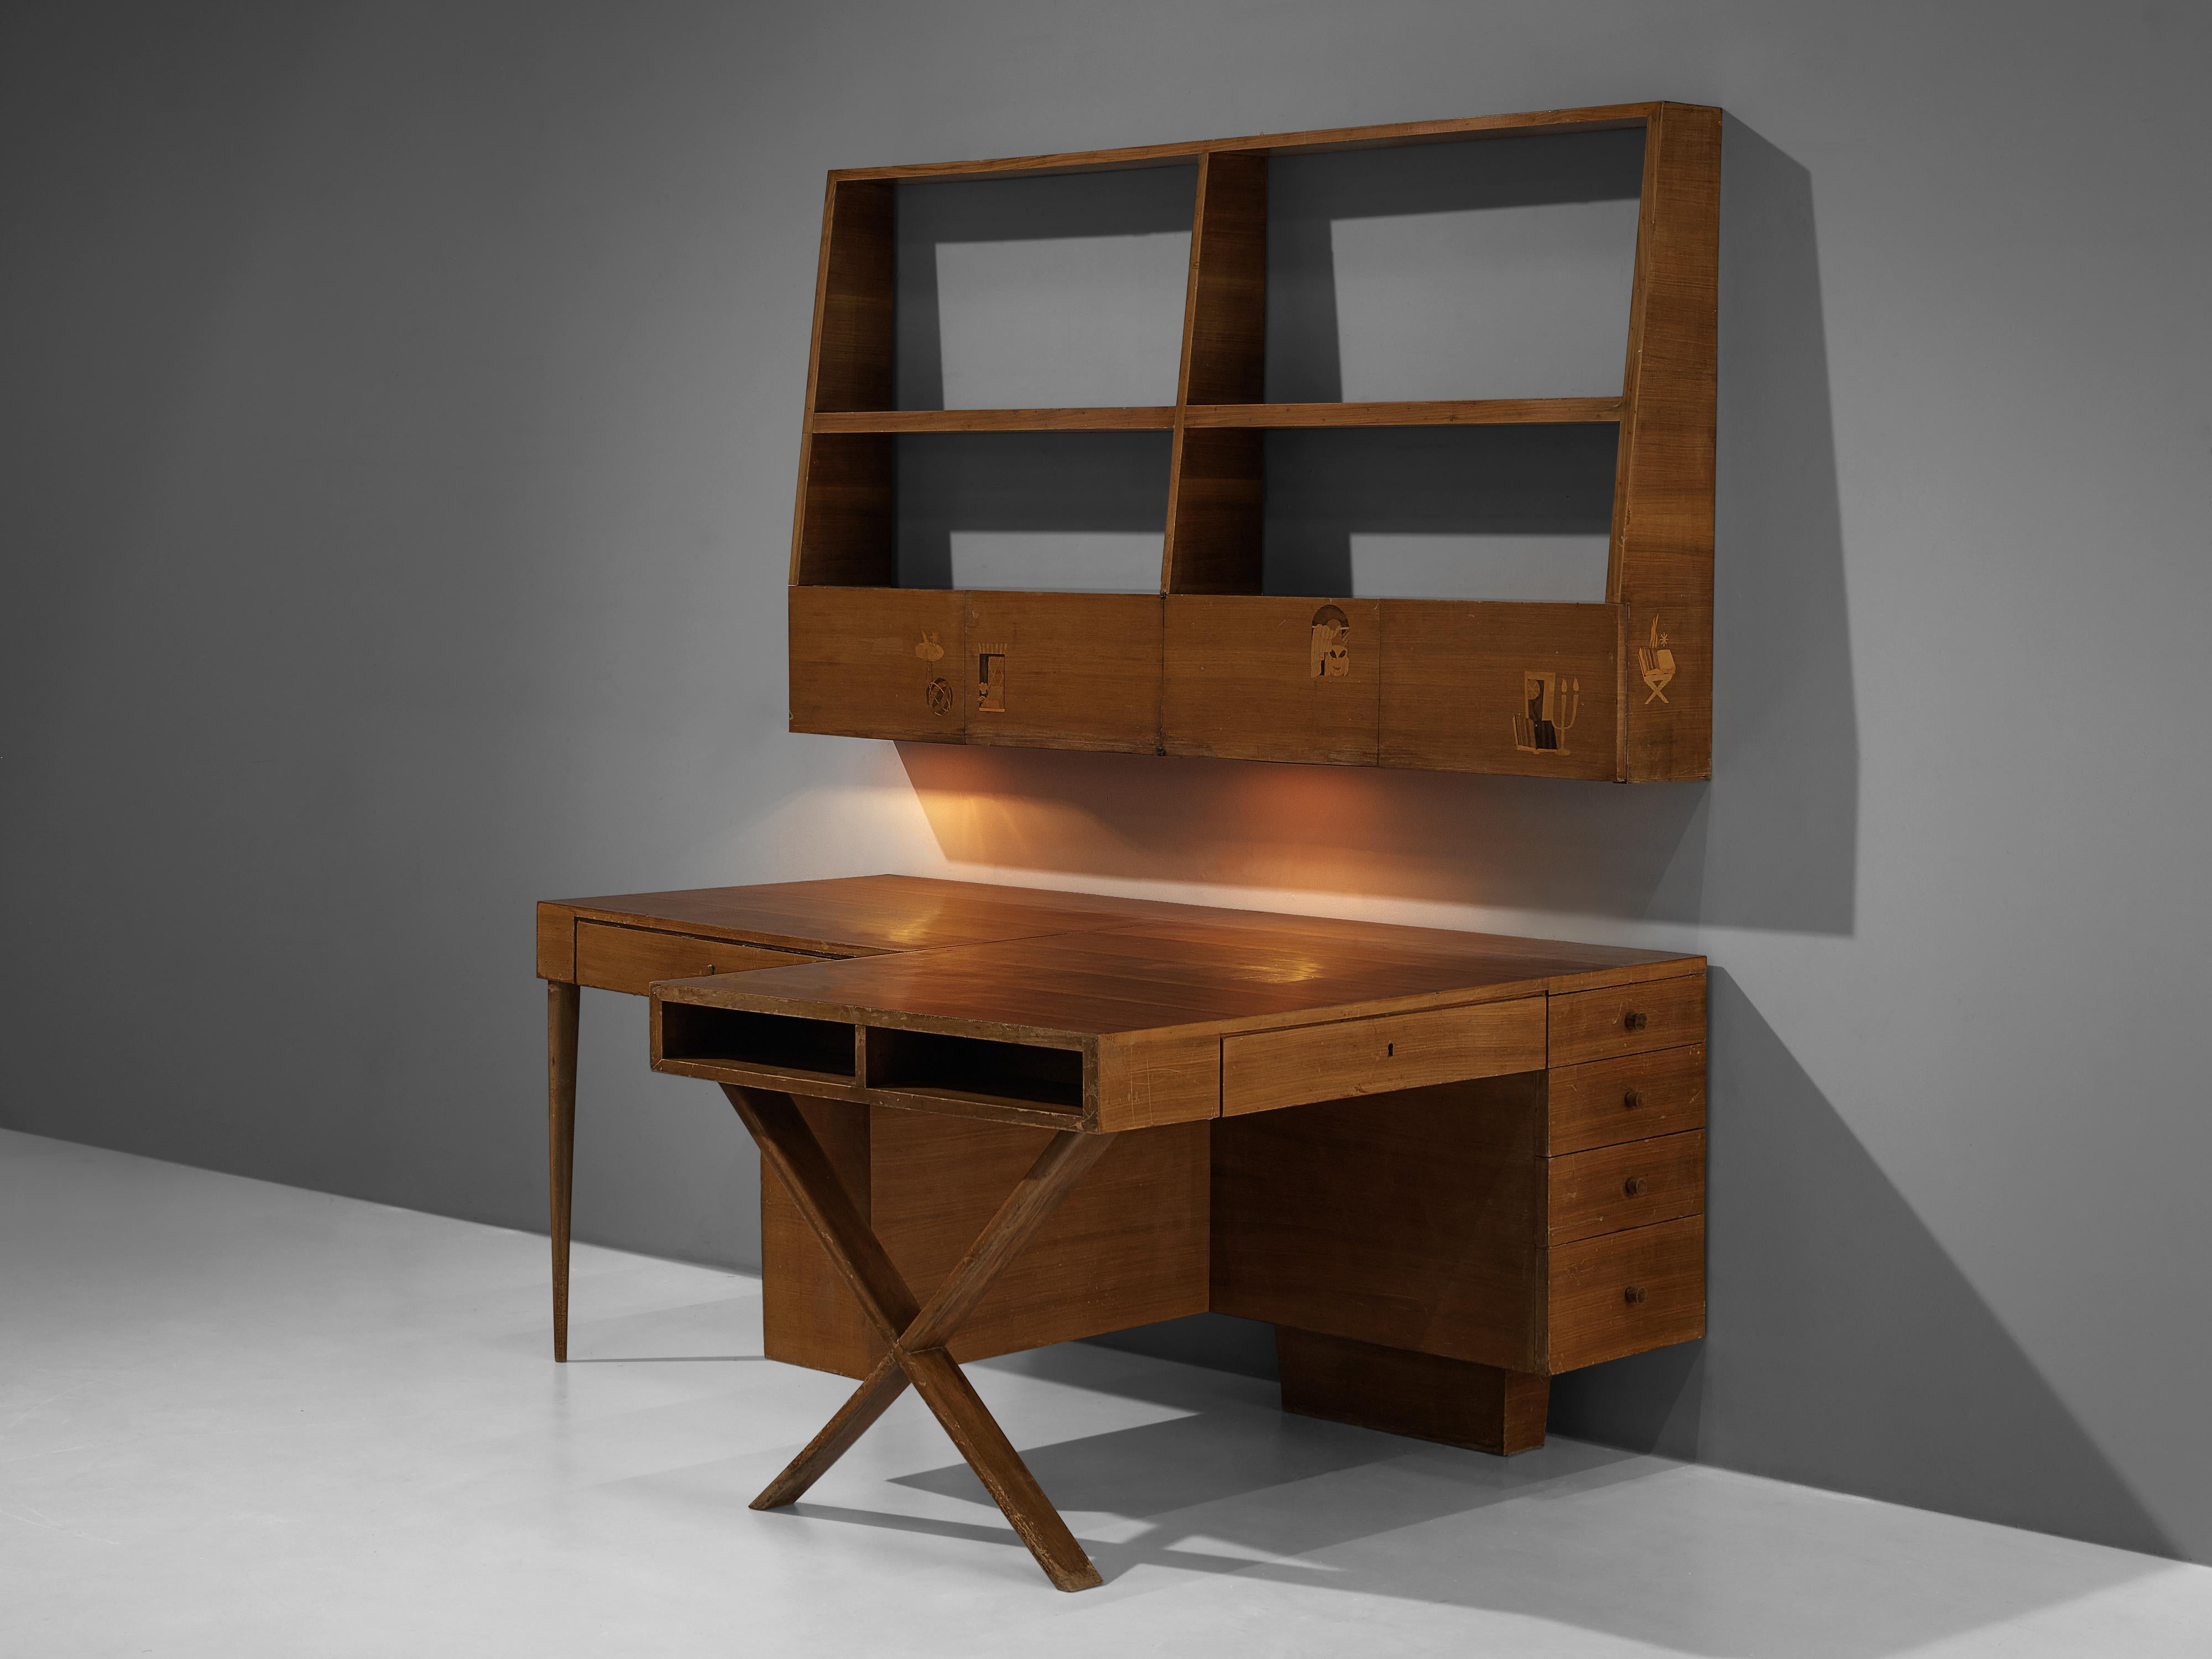 Double desk with shelf, walnut, Italy, 1950s

Custom-made desk for two people with wall-mounted shelf. Luxurious detail are the wood inlays that show different motives. The desk is highly versatile in its storage facilities and functional use. With